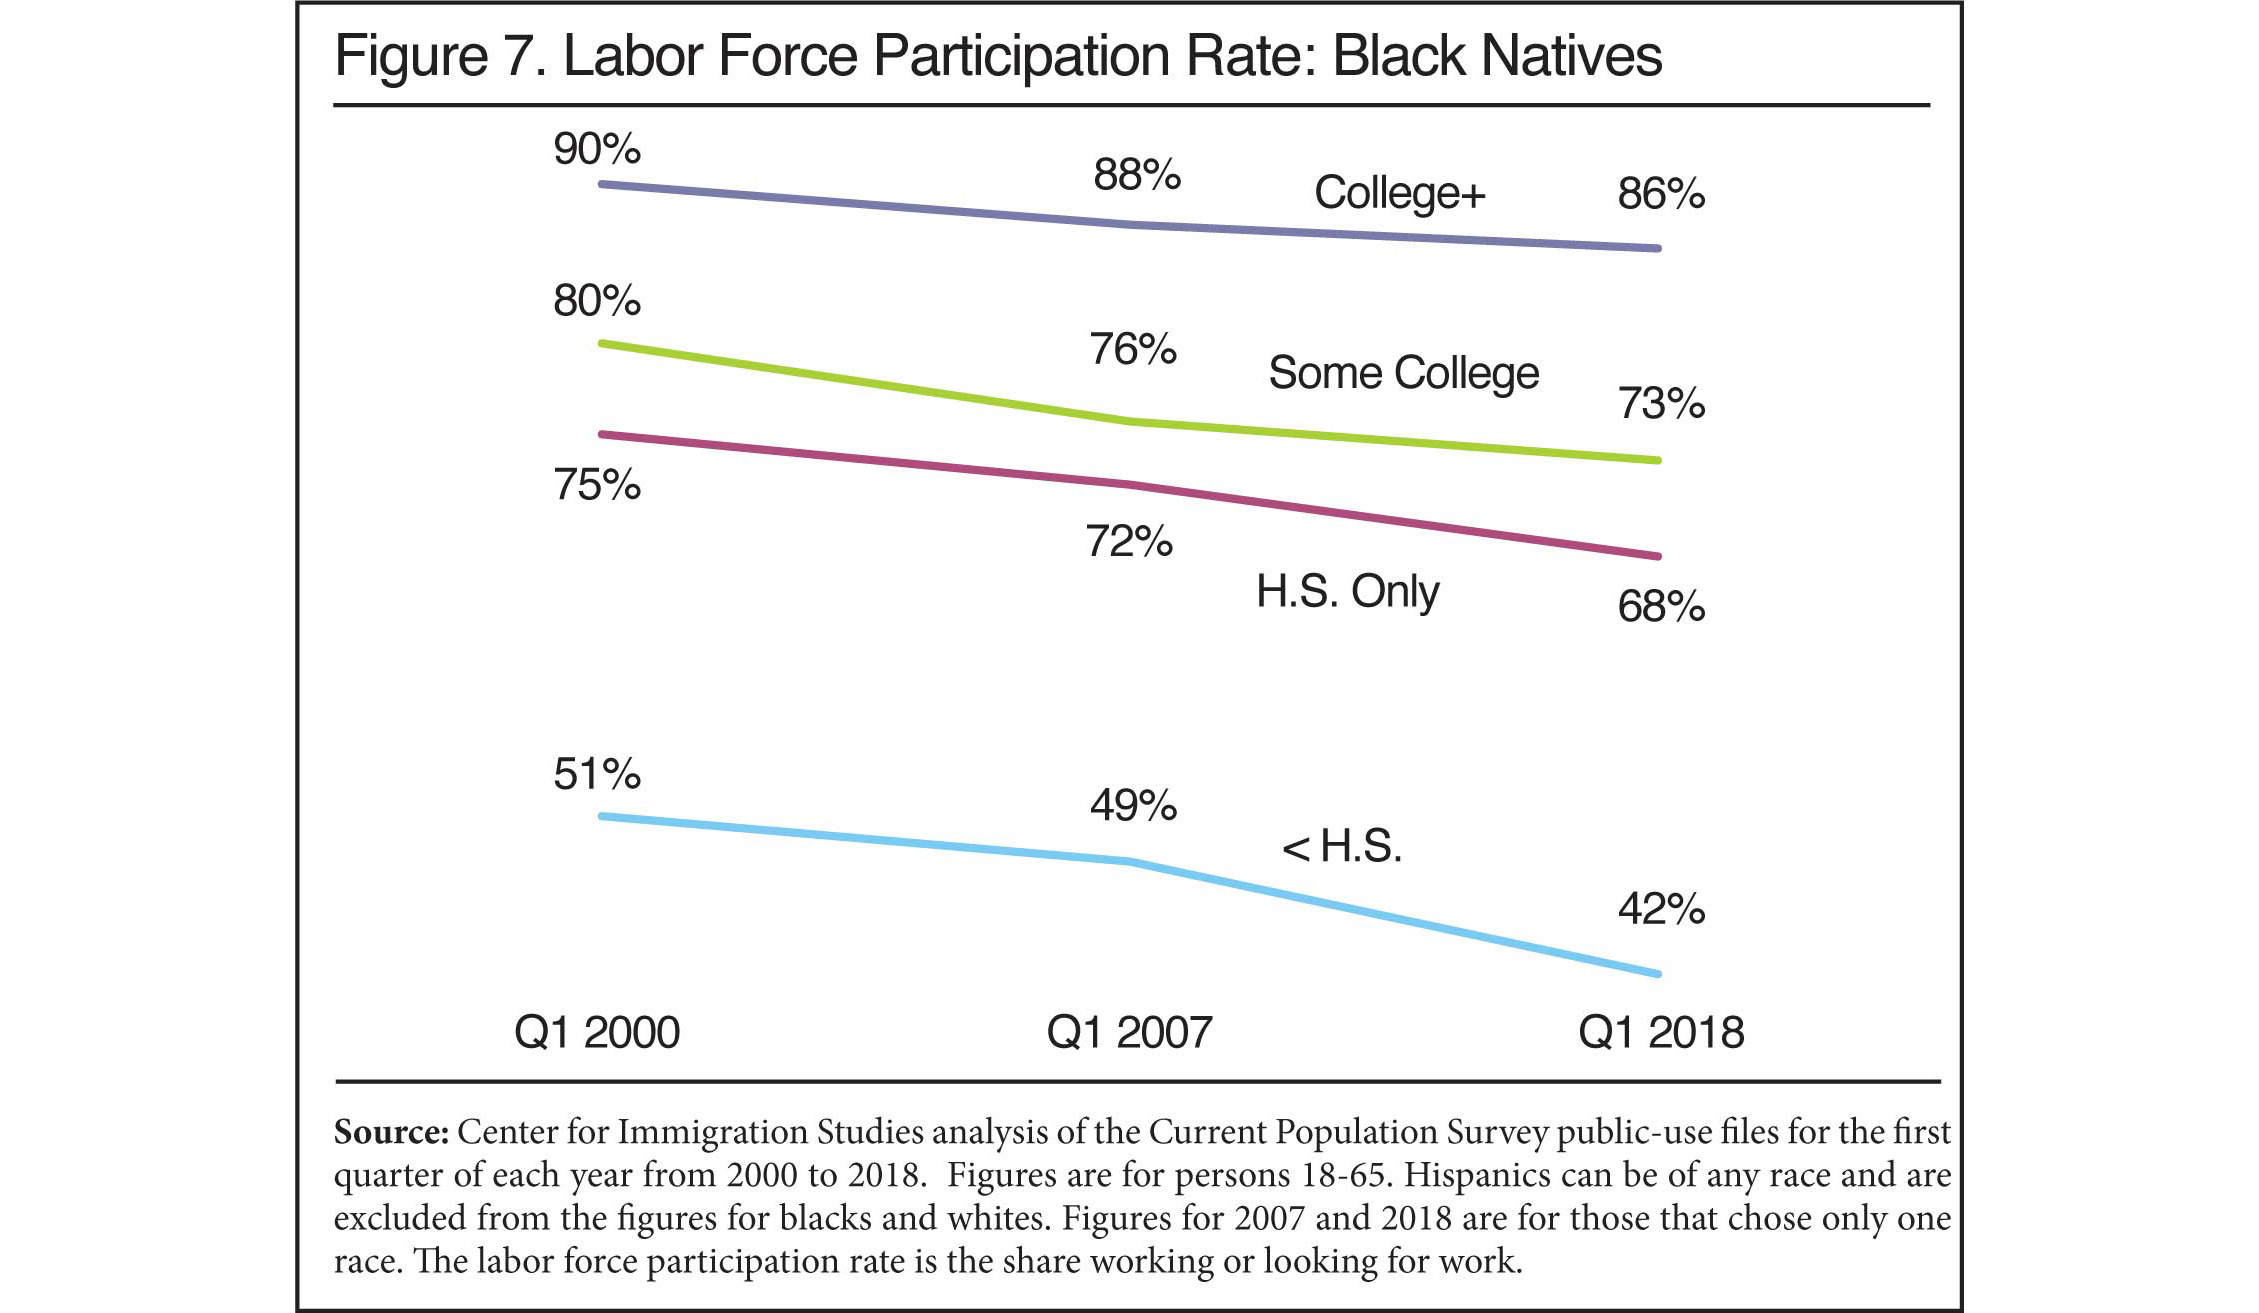 Graph: Labor Force Participation Rate for Black Natives, 2000 to 2018